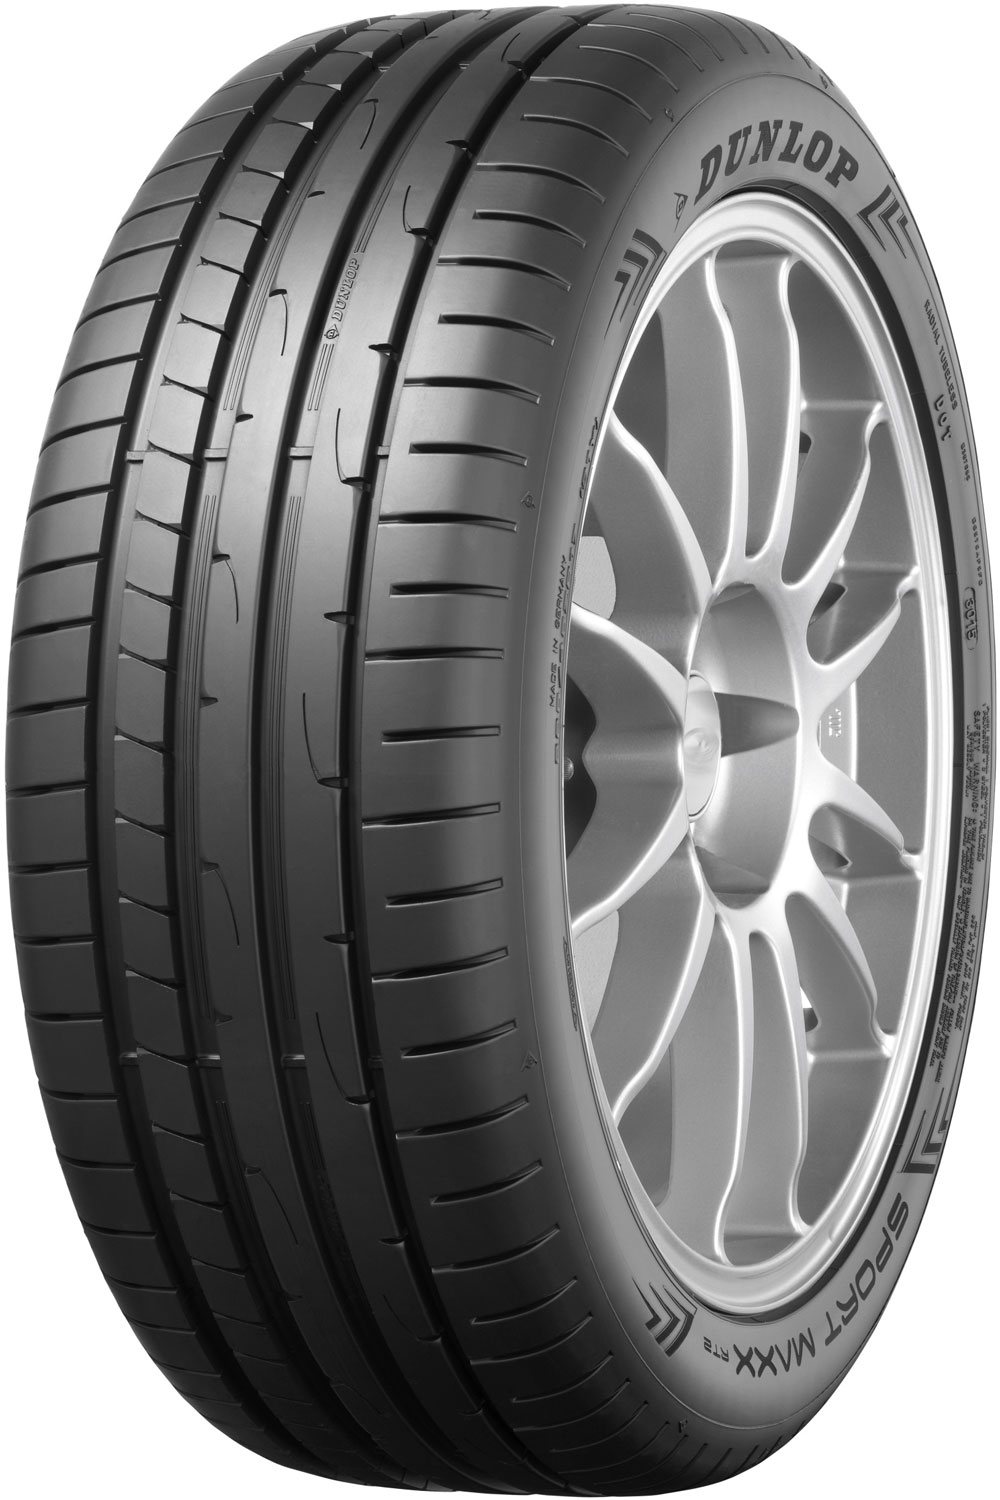 Anvelope auto DUNLOP SP MAXX RT 2*MO MERCEDES BMW FP 225/55 R17 97Y